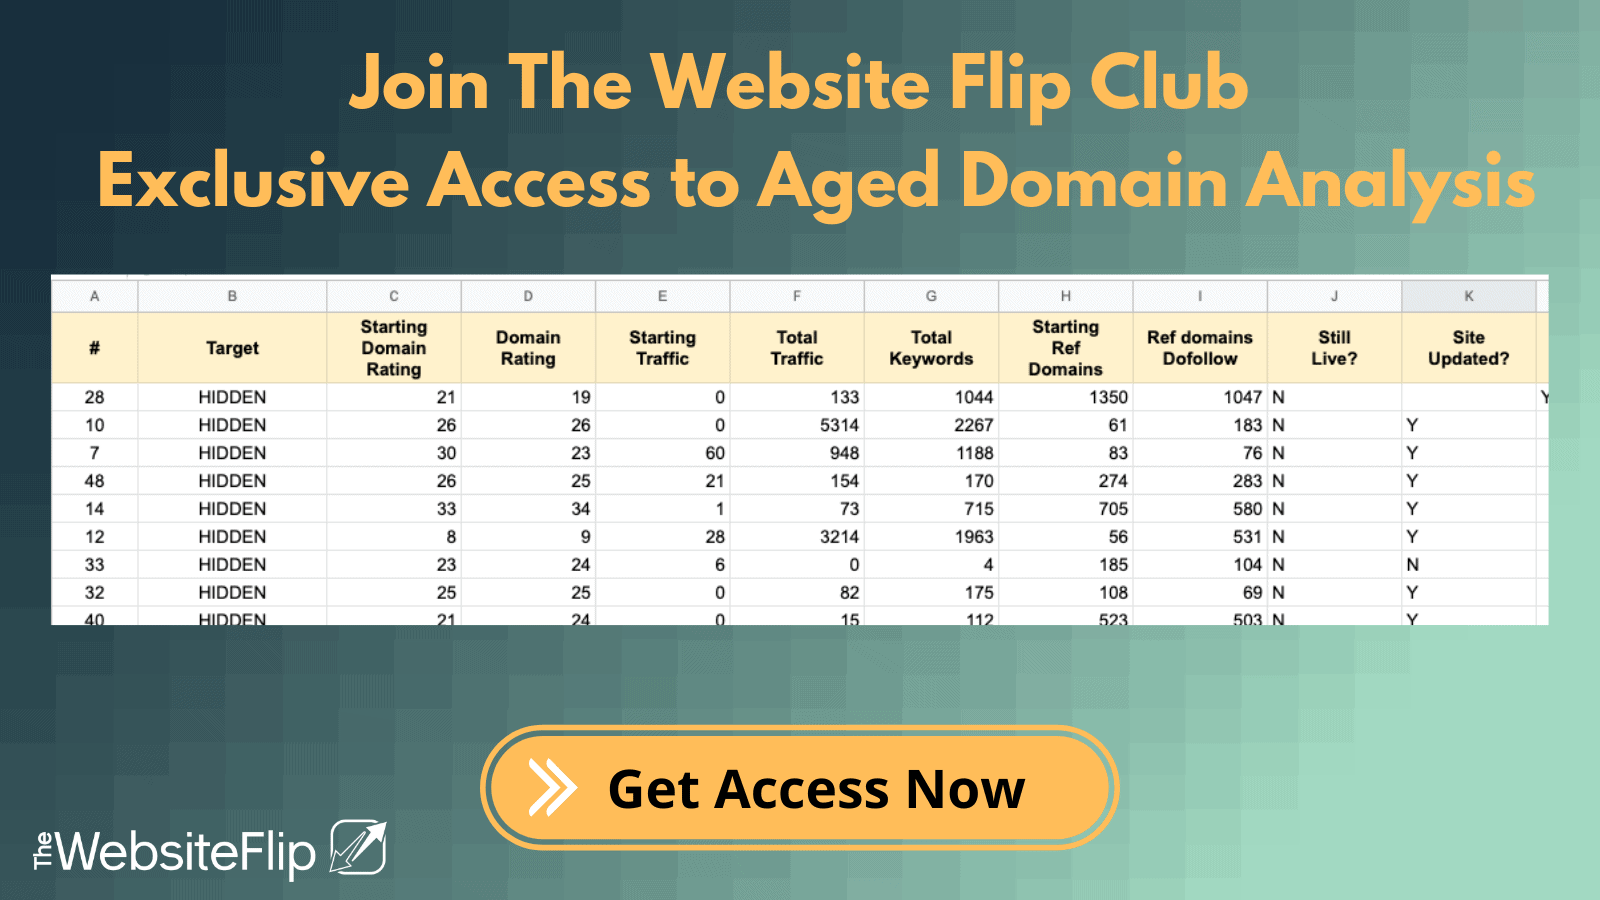 Exclusive Access to Aged Domain Analysis